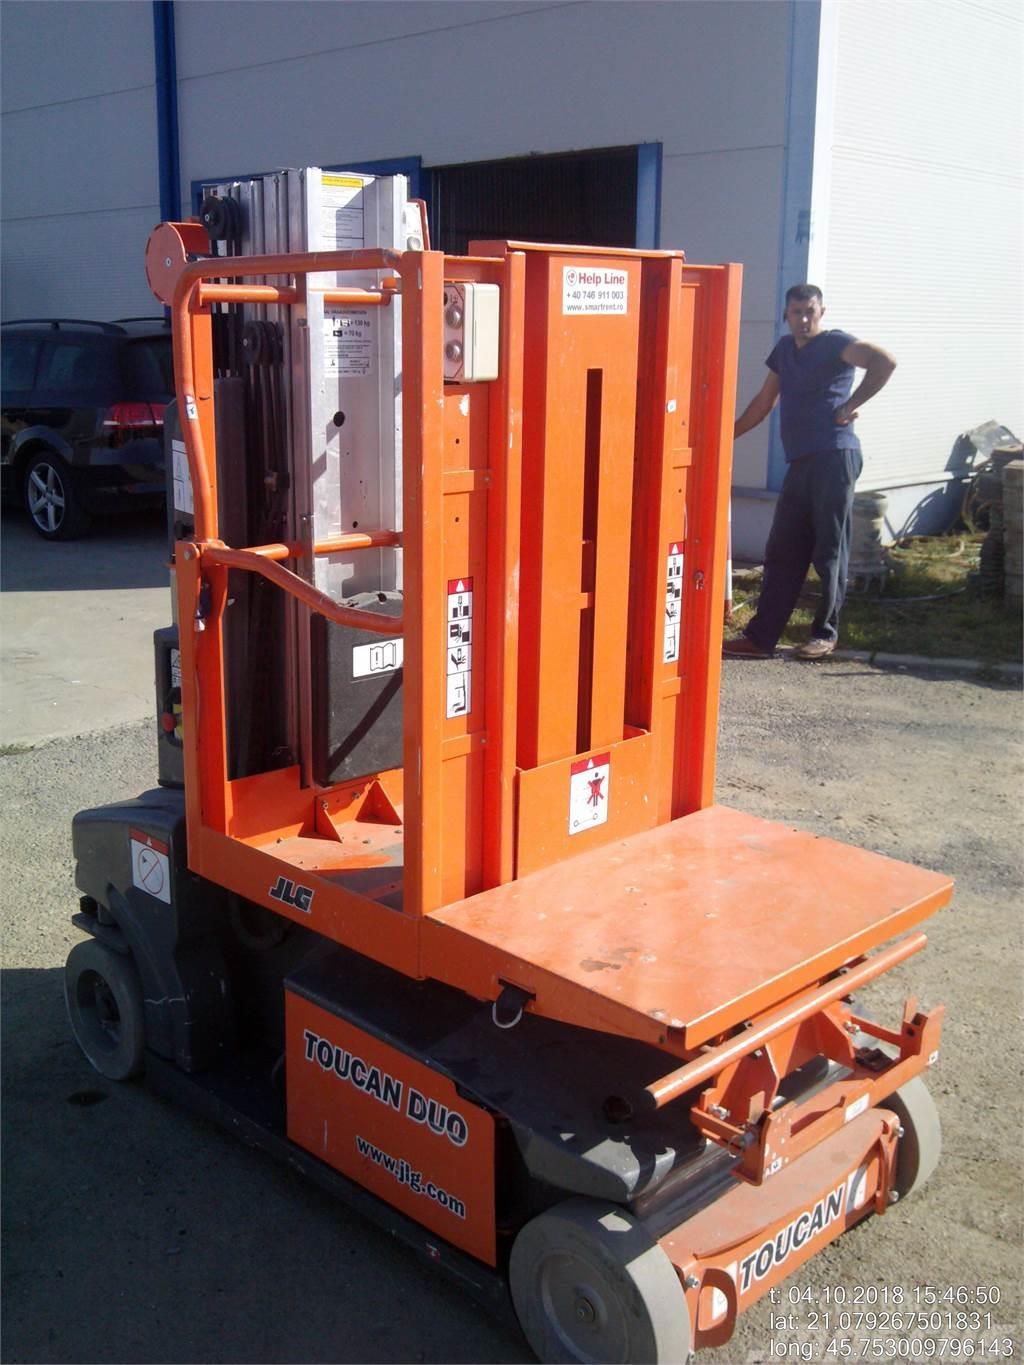 JLG Toucan duo Other